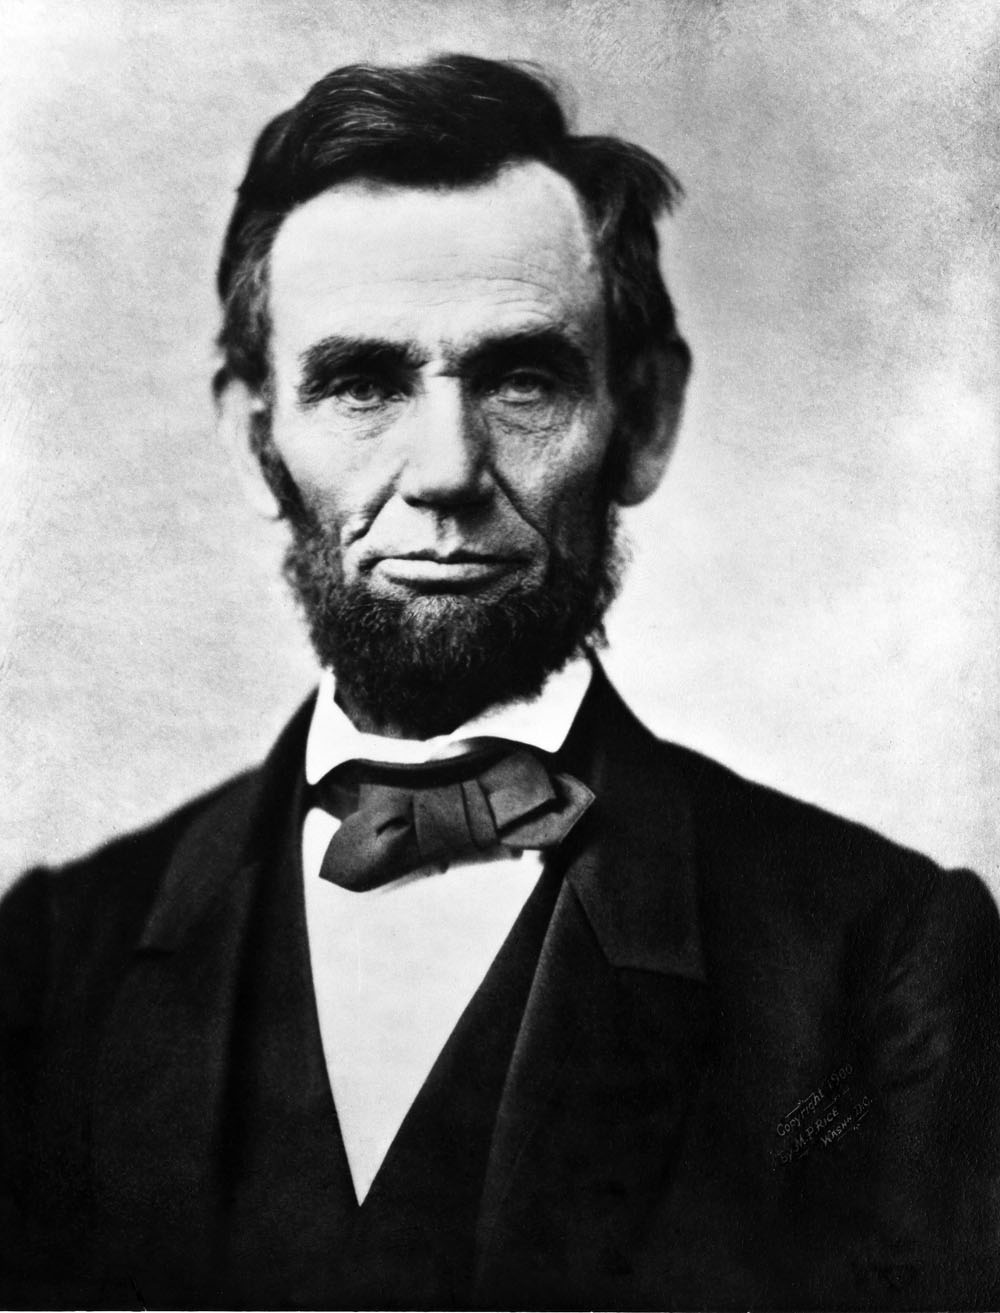 Abraham Lincoln actually filed for bankruptcy twice.